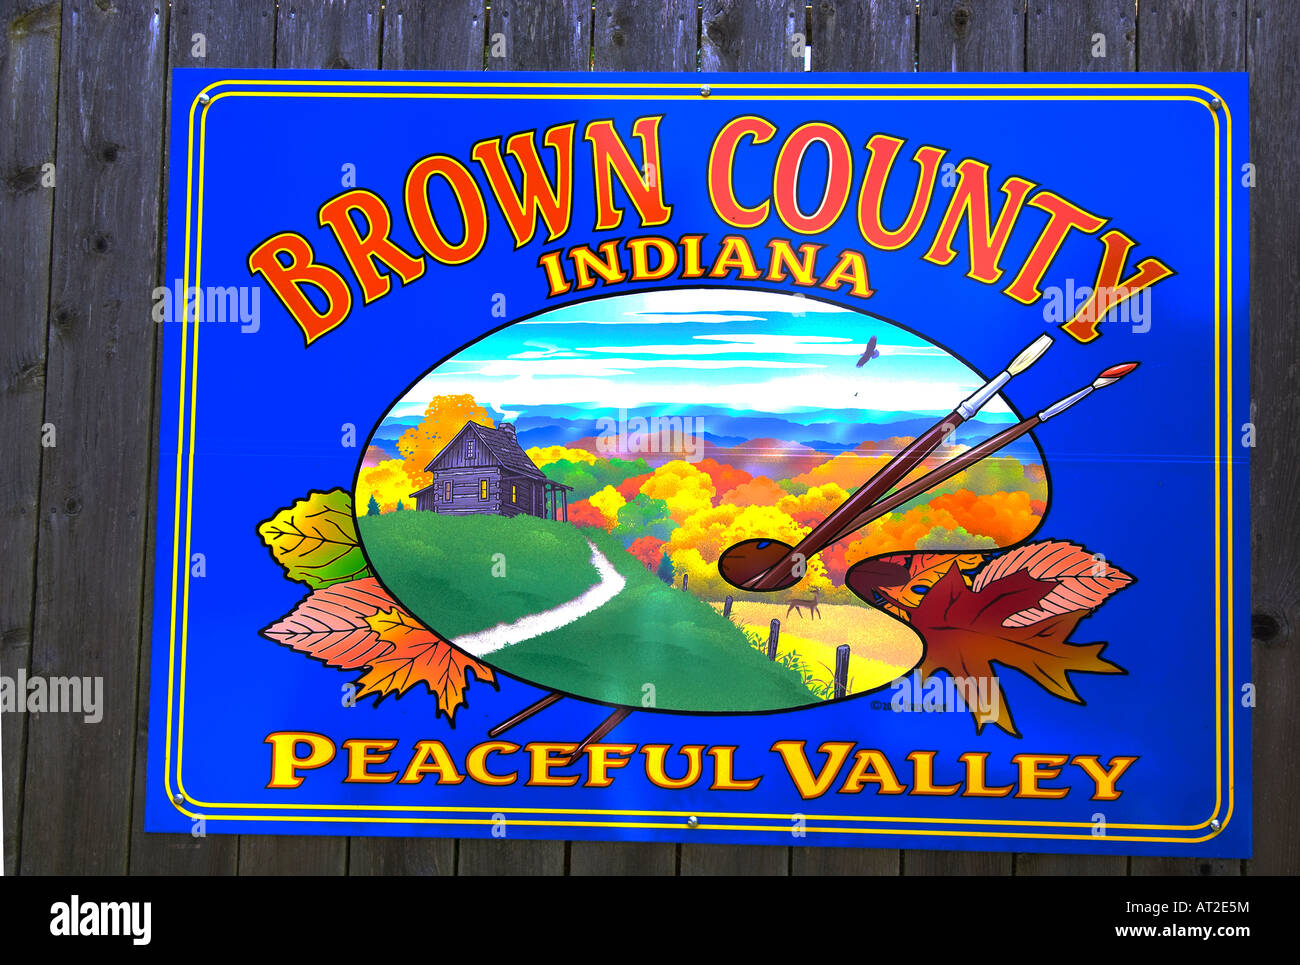 Sign advertising Brown County in Indiana where many artists and art galleries are located Stock Photo